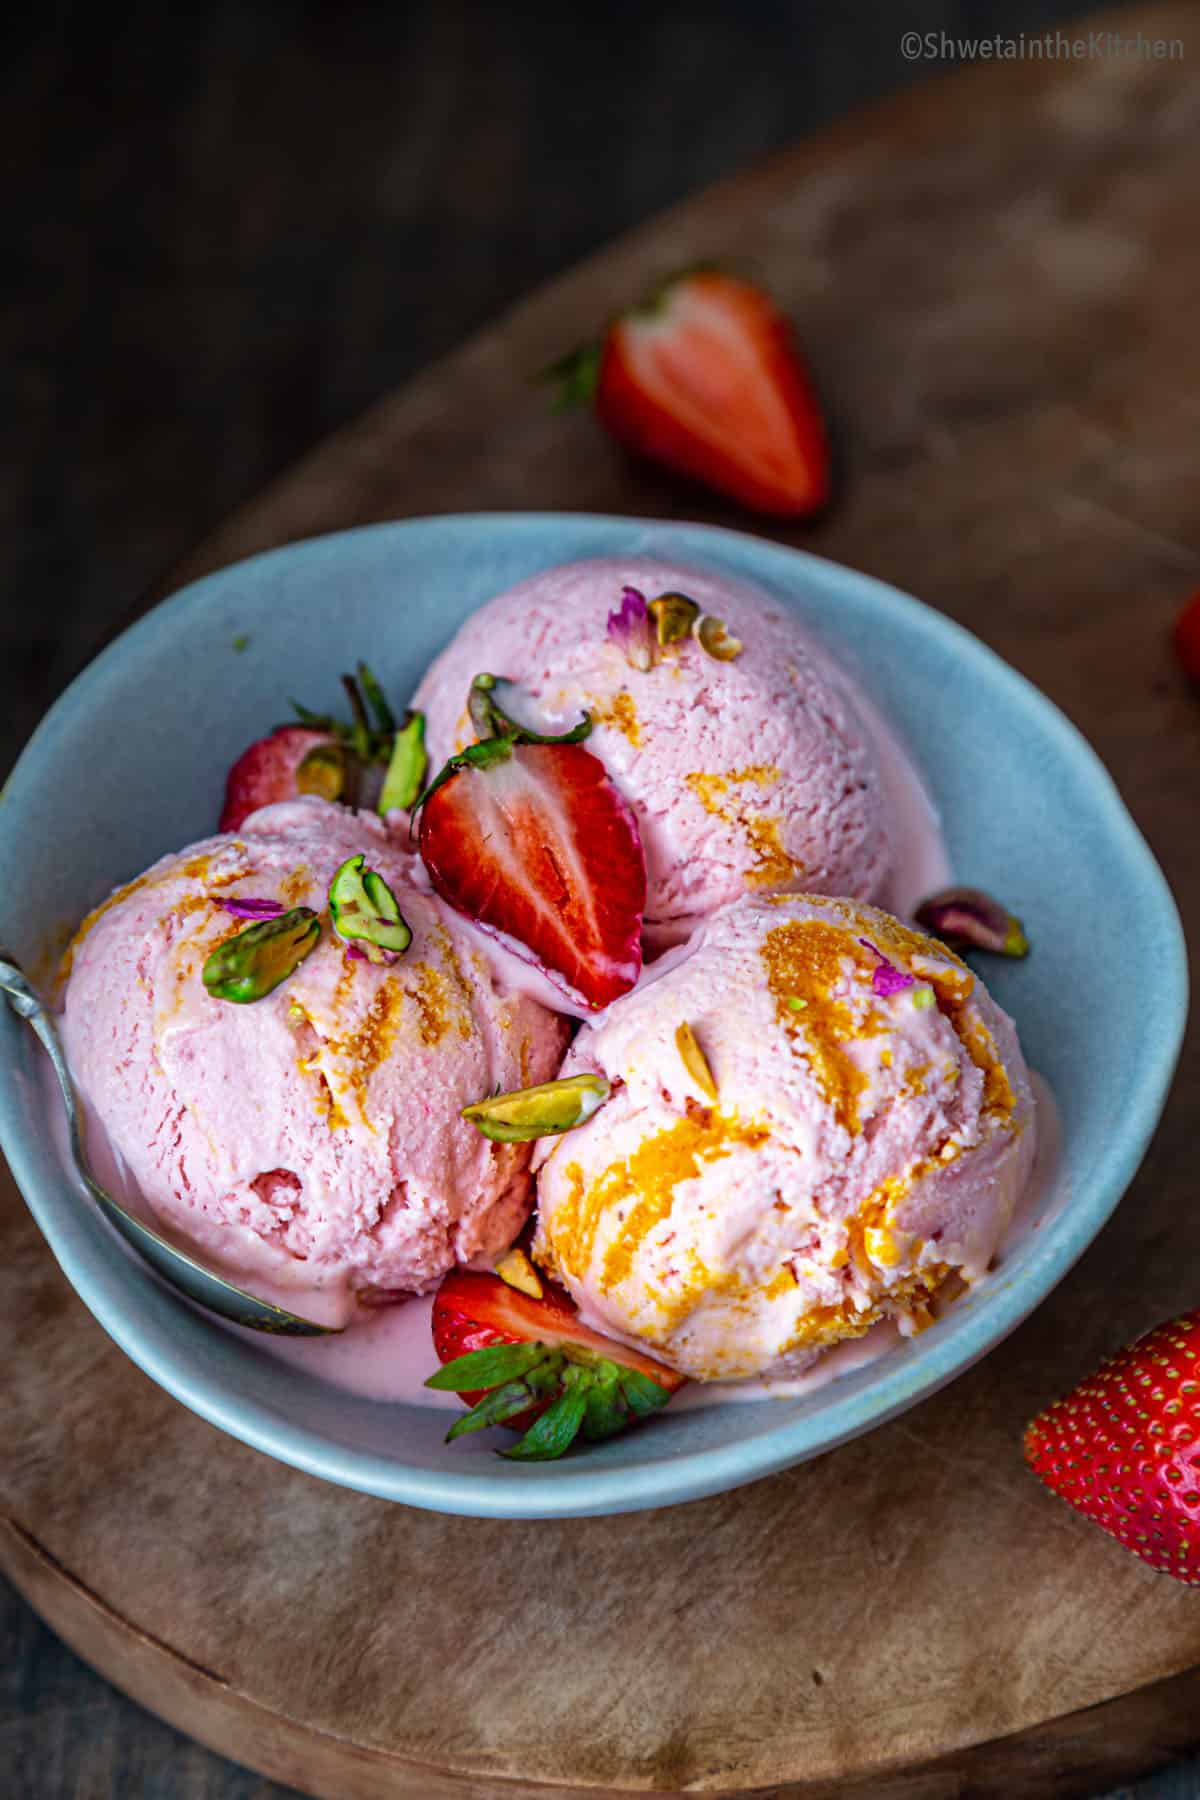 three scoops of strawberry ice cream in a blue bowl garnished with cut strawberry and pistachios. 